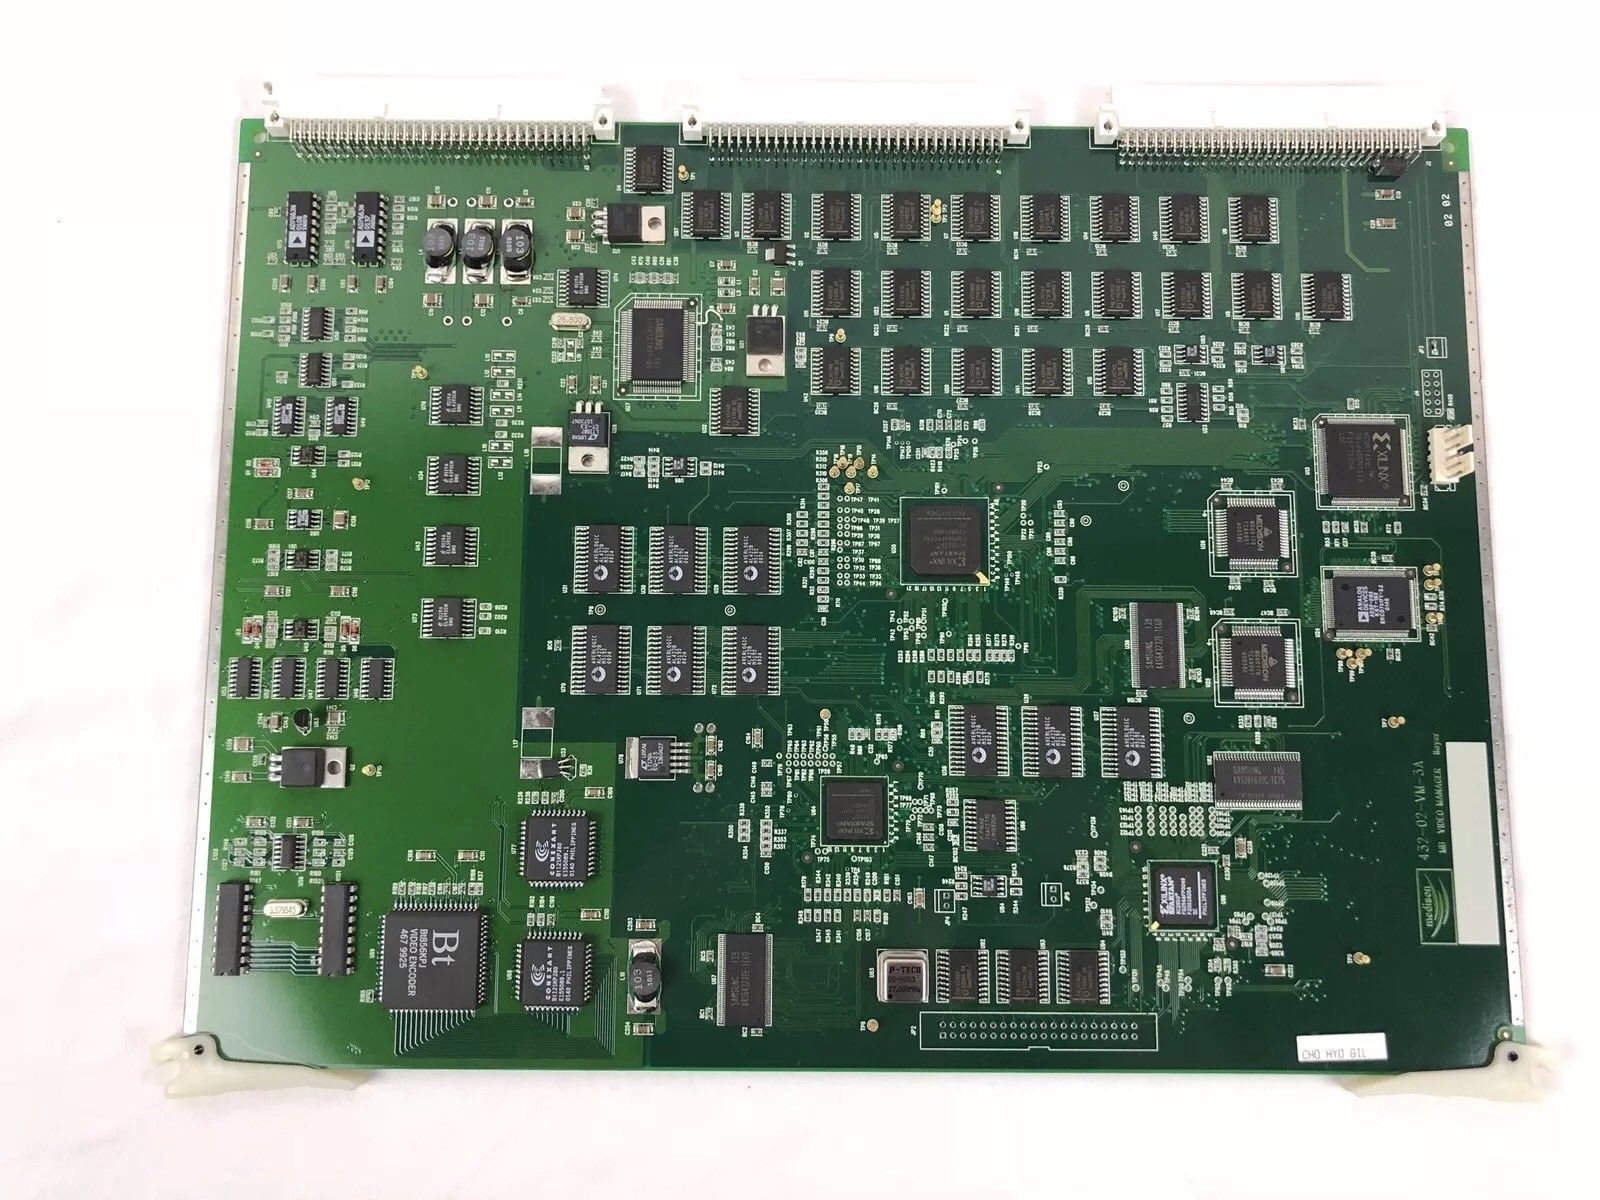 Phillips Ultrasound HDI-4000 Medison Video Manager Board 432-01-VM-3A